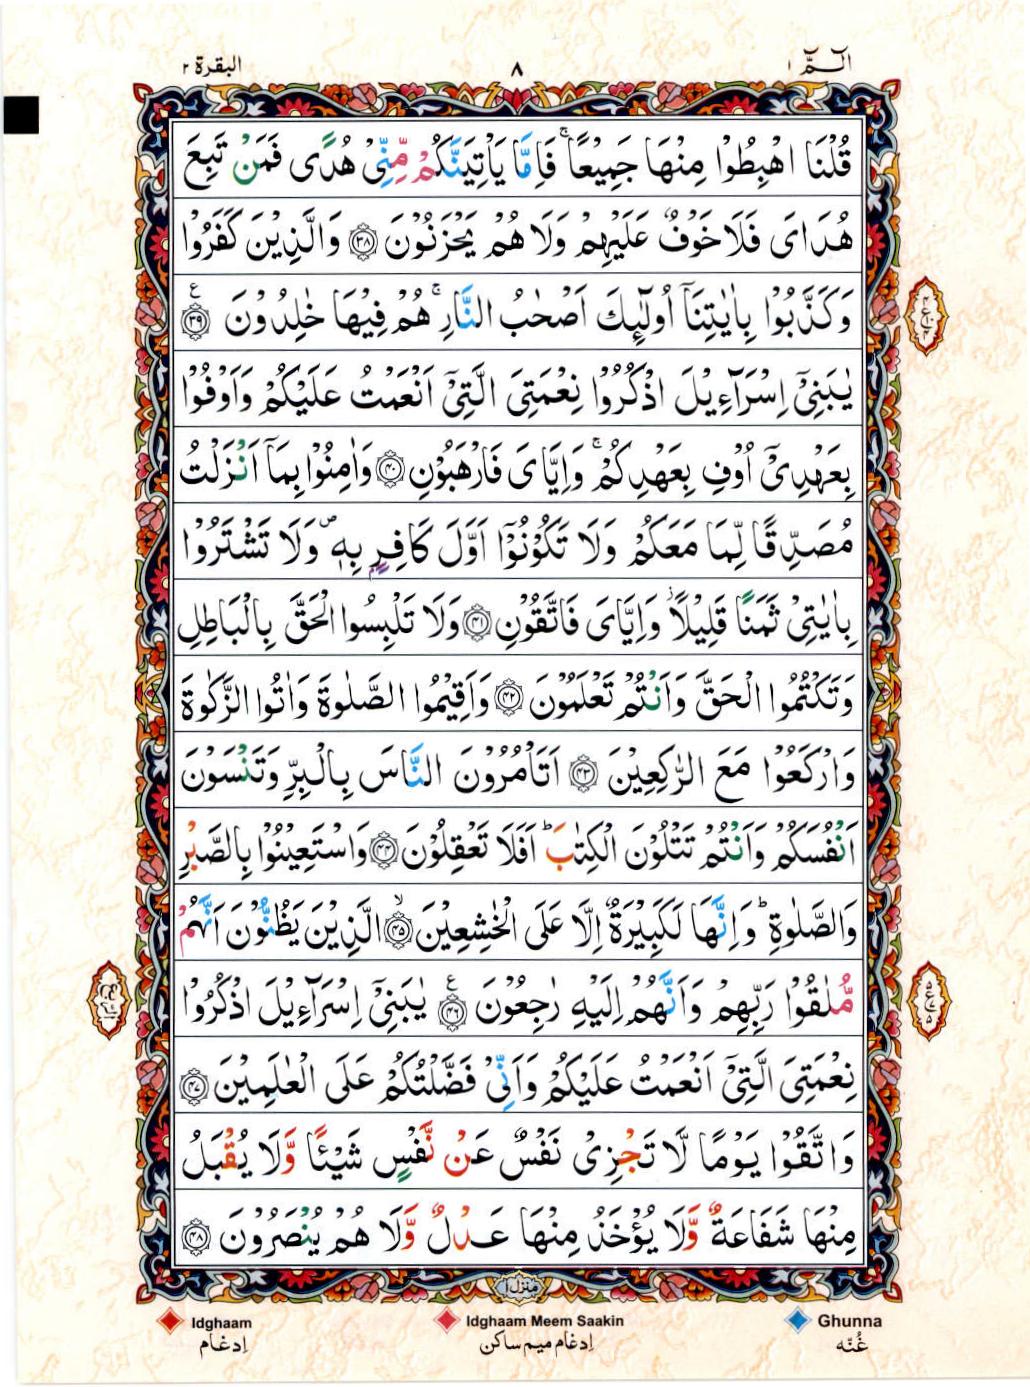 Read 15 Lines Coloured Coded Quran Part 1 Page No 8, Practice Quran